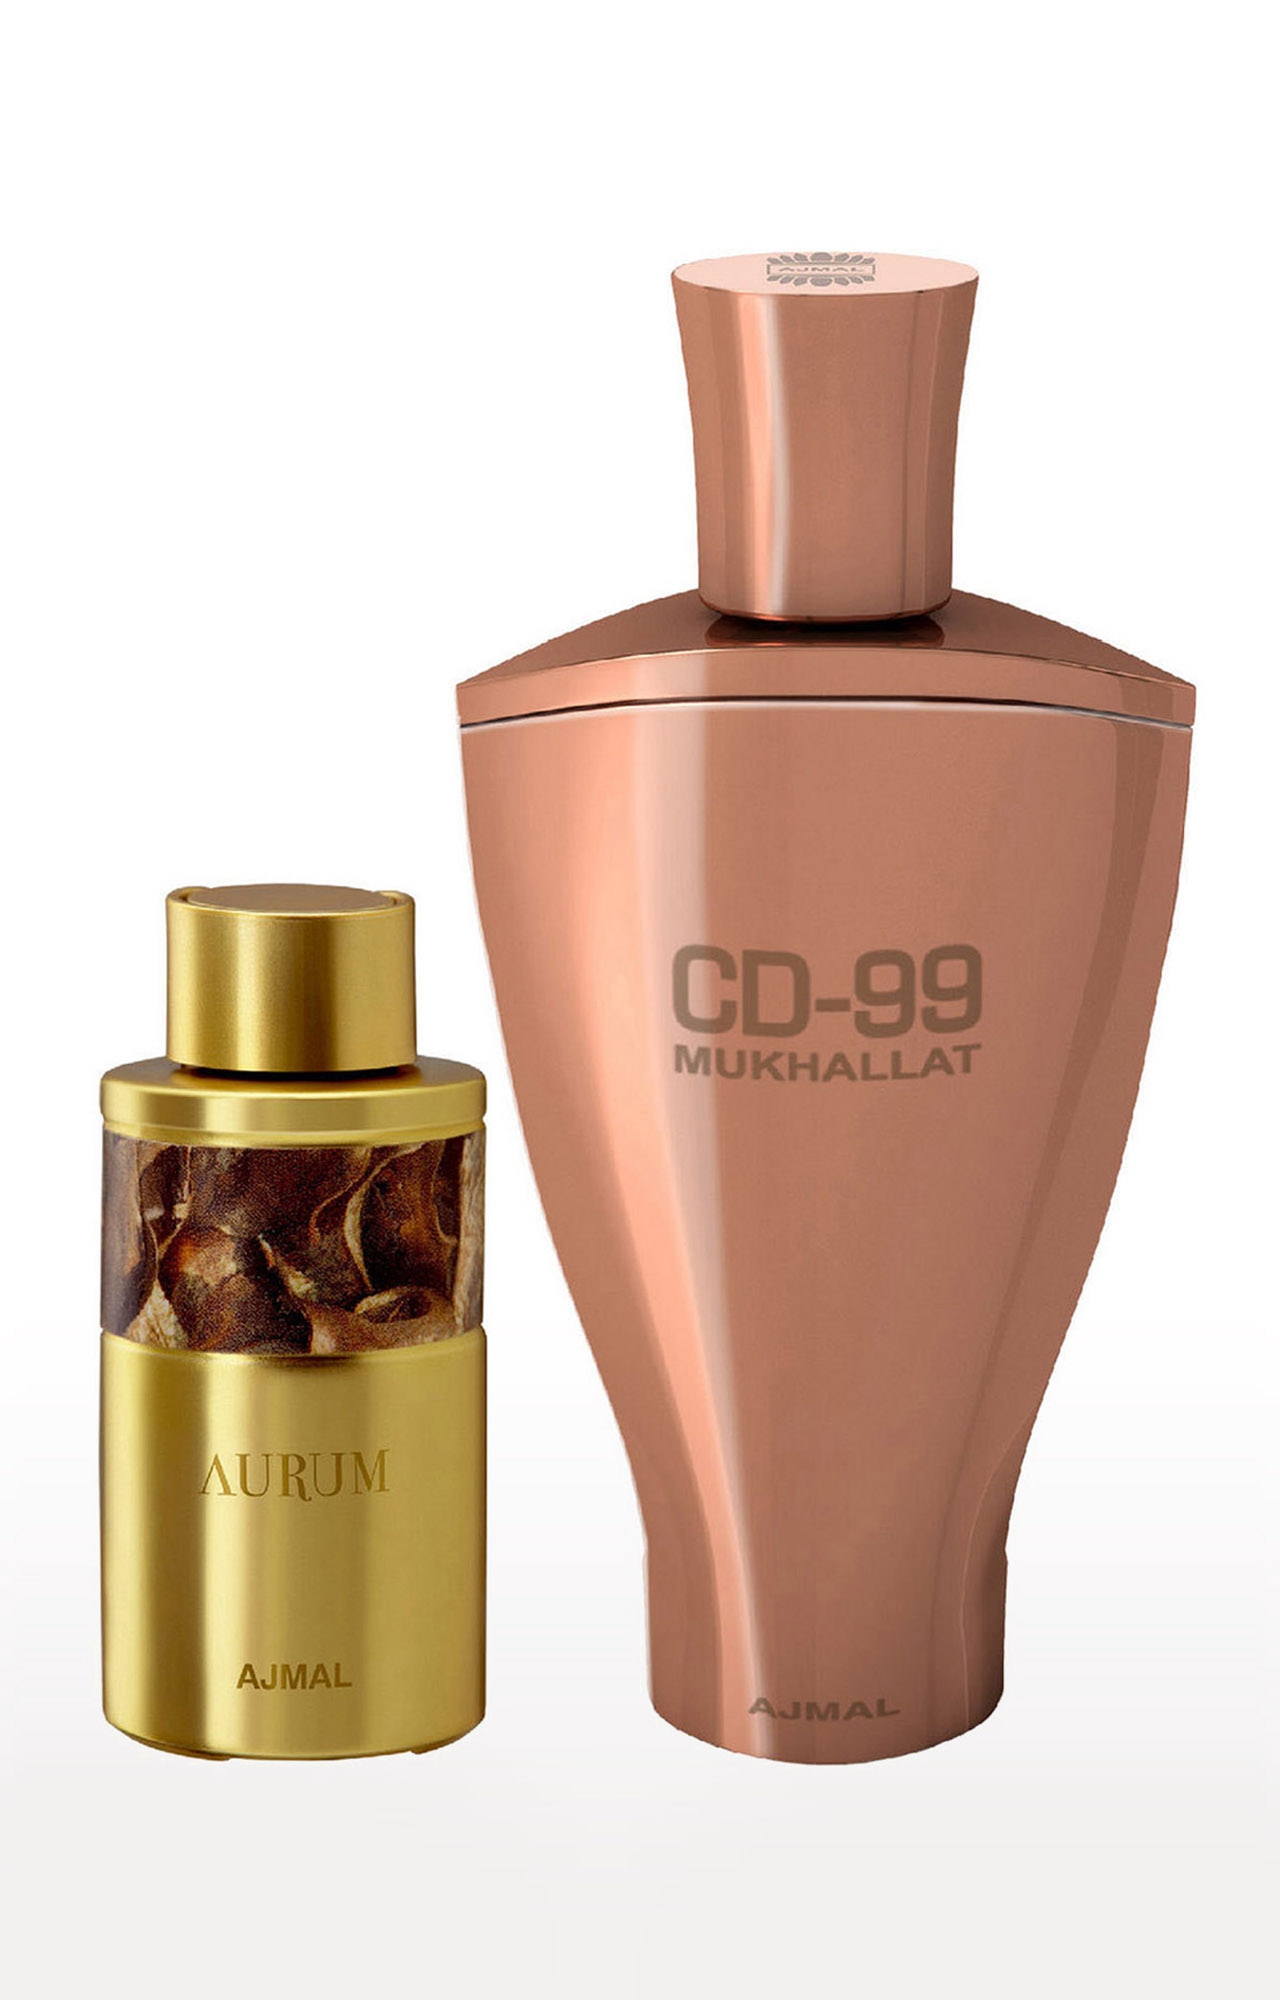 Ajmal | Ajmal Aurum Concentrated Perfume Oil Alcohol-free Attar 10ml for Women and CD 99 Mukhallat Concentrated Perfume Oil Oriental Alcohol-free Attar 14ml for Unisex 0